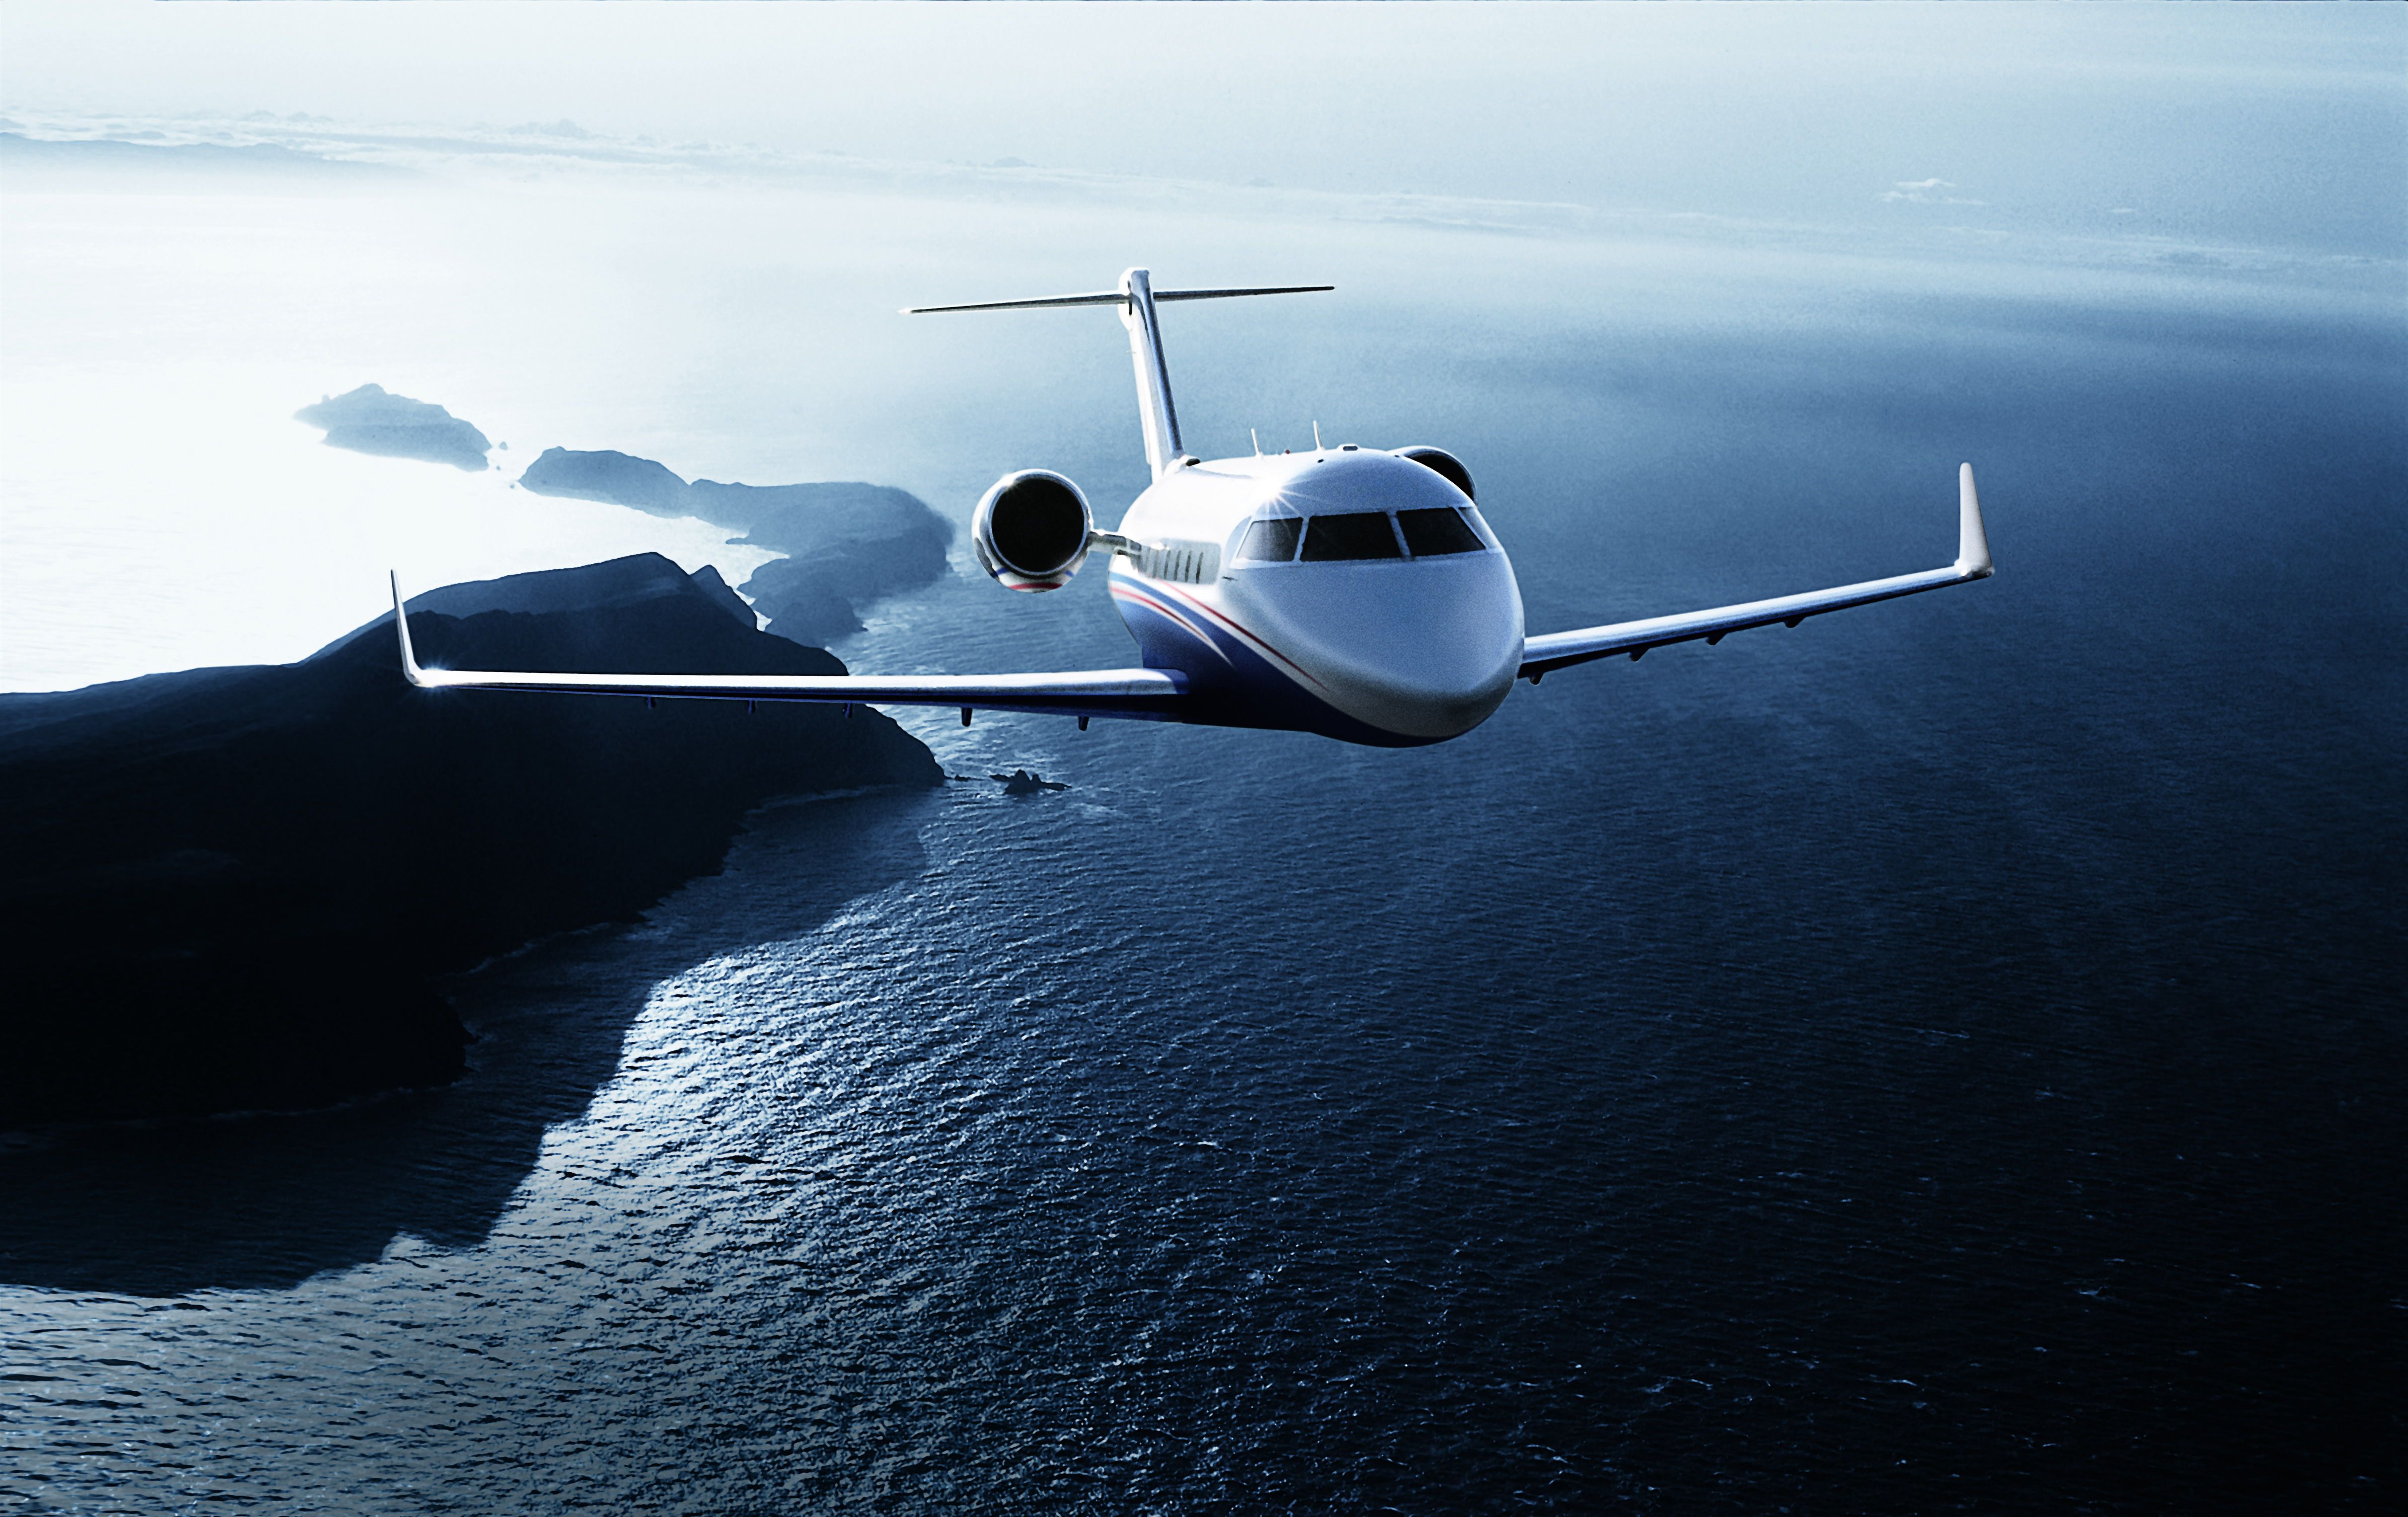 Black Private Jet Wallpapers